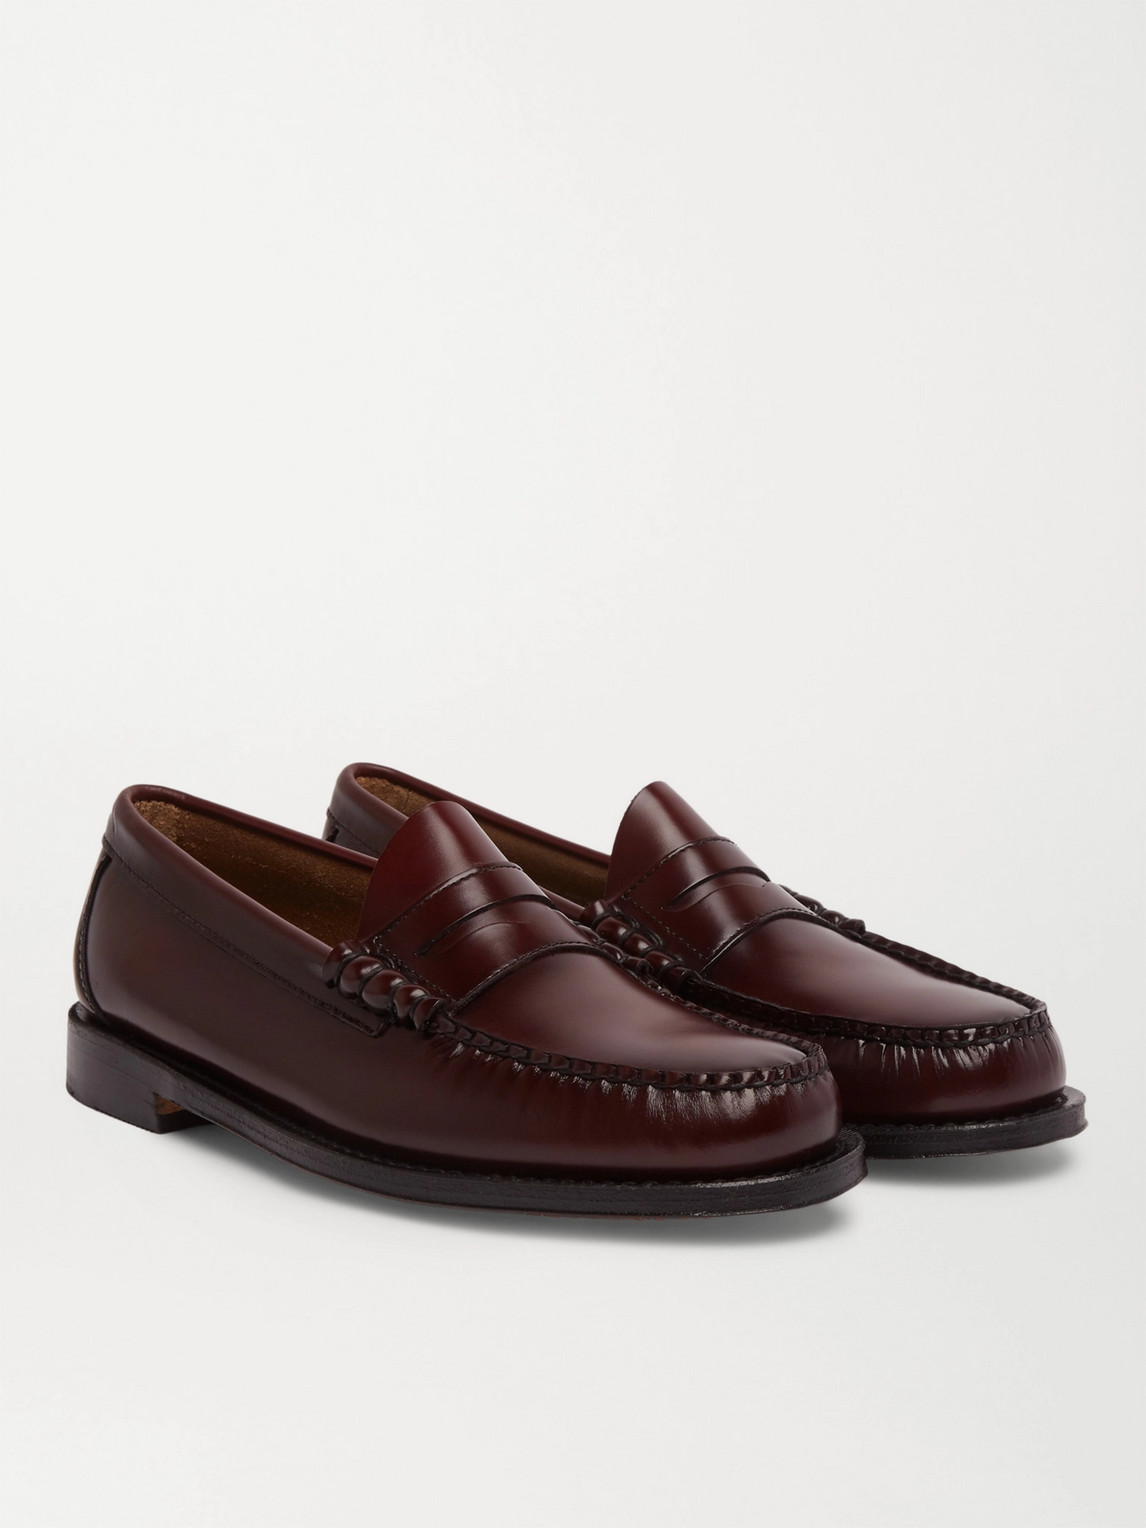 G.h. Bass Weejuns Heritage Larson Leather Penny Loafers In Burgundy